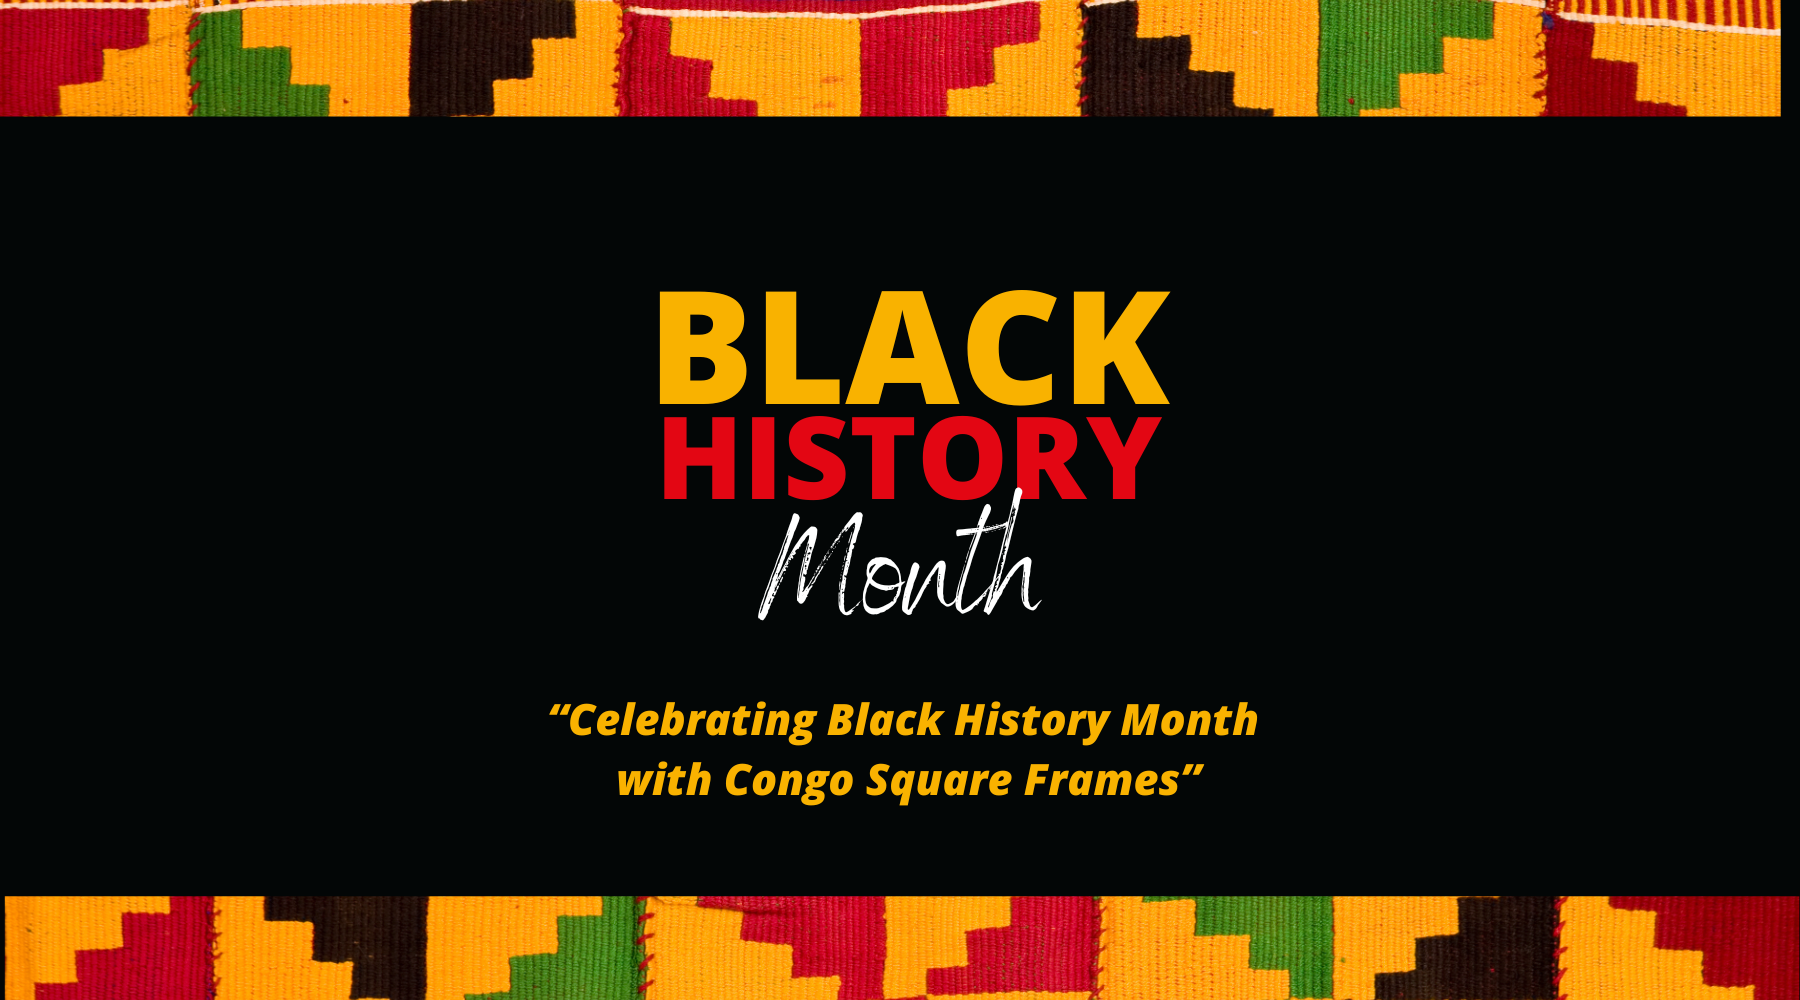 Celebrating Black History Month with Congo Square Frames